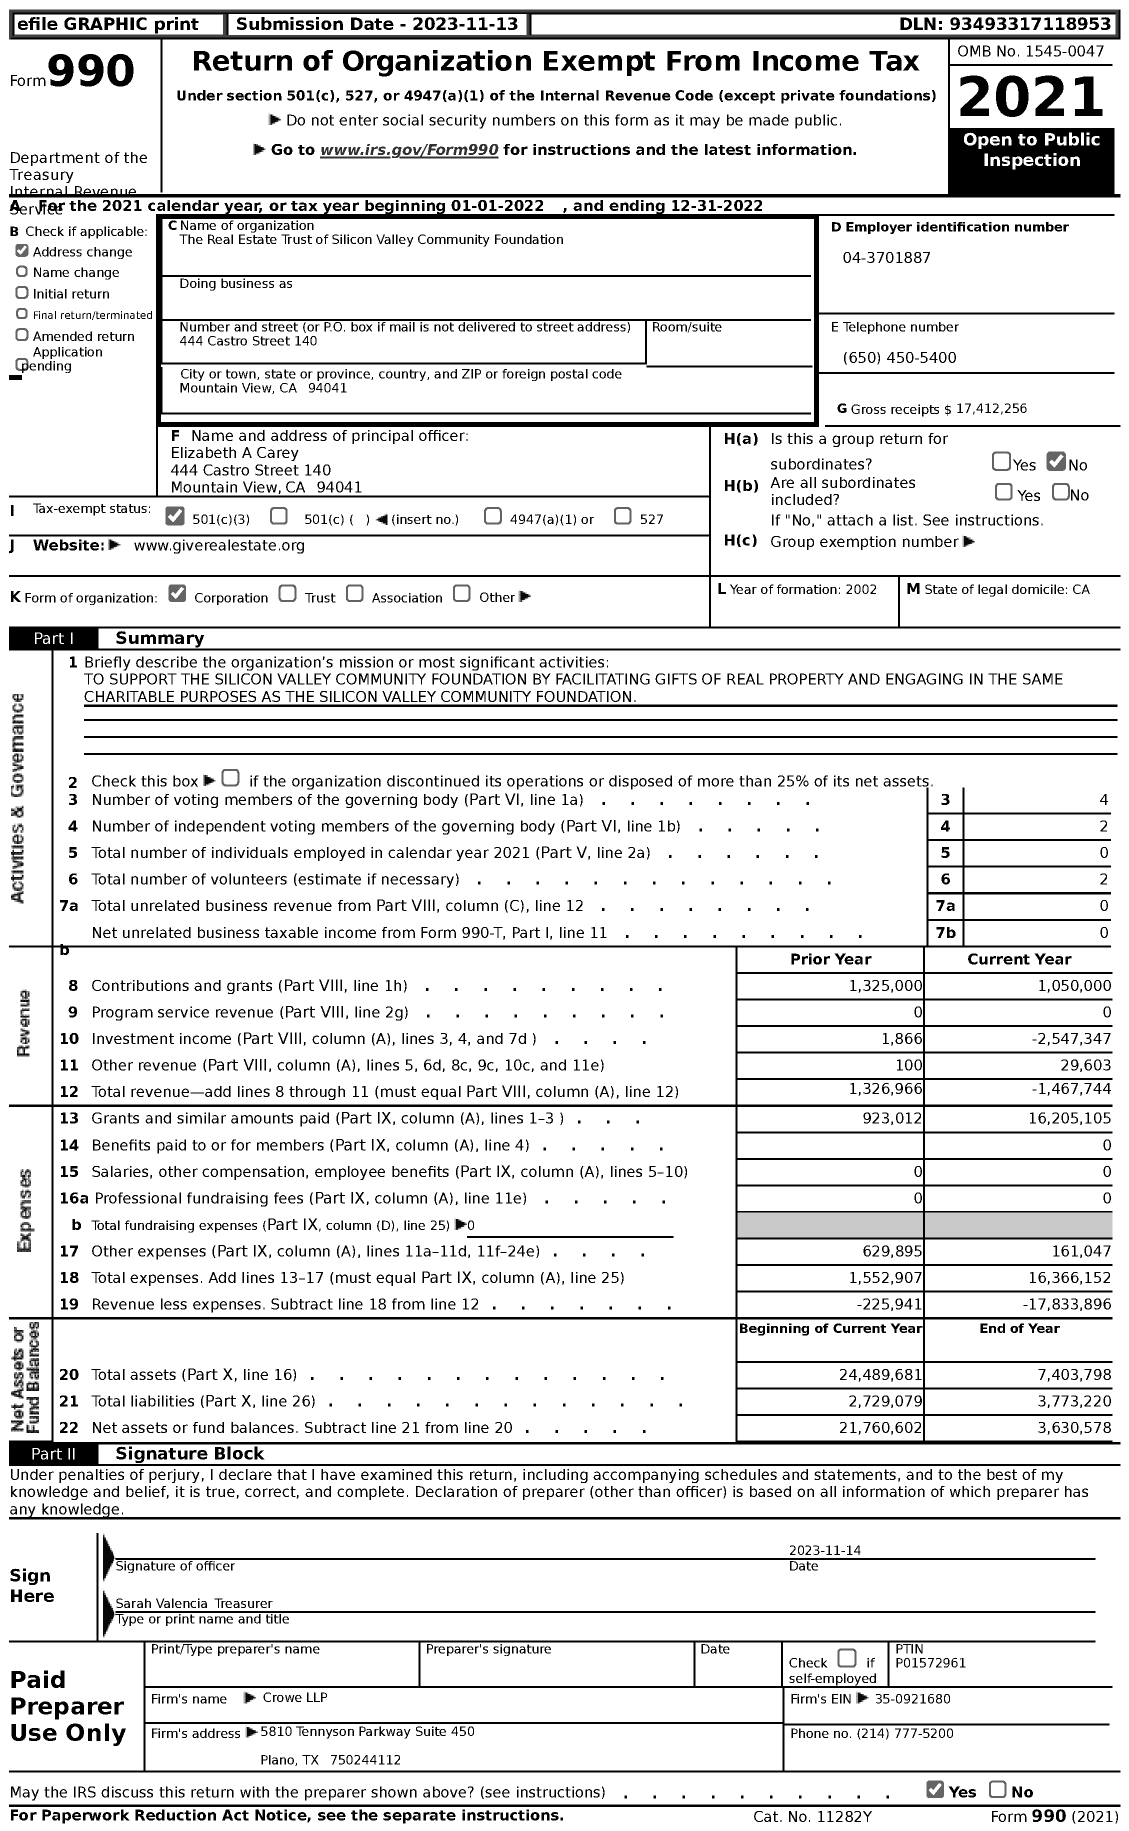 Image of first page of 2022 Form 990 for The Real Estate Trust of Silicon Valley Community Foundation